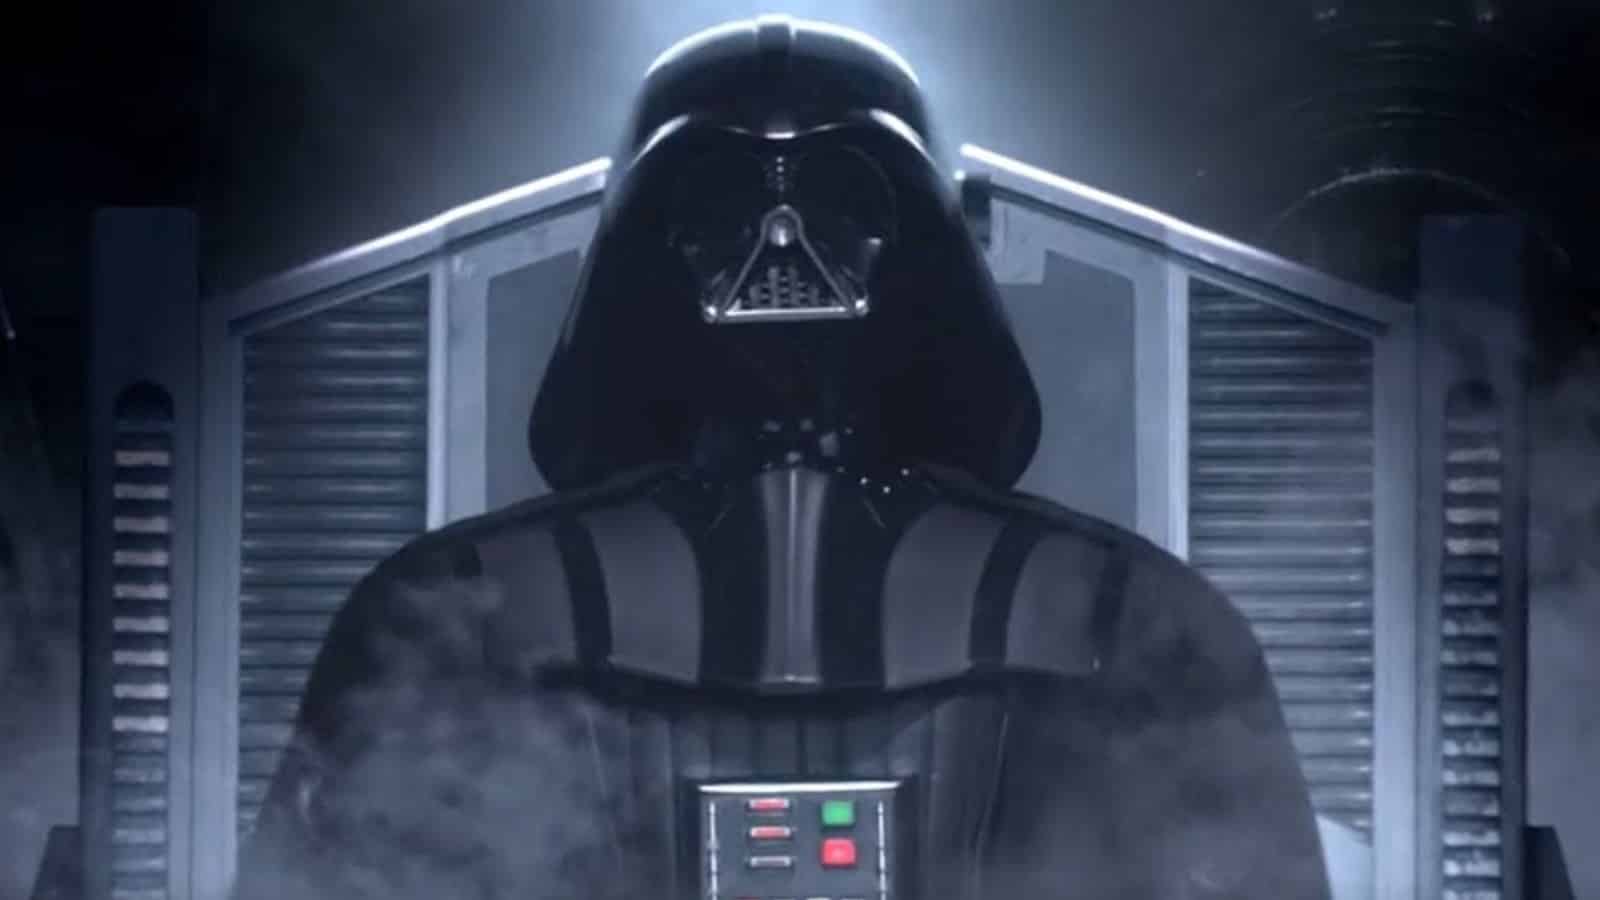 Darth Vader in Star Wars: Revenge of the Sith (Episode III)